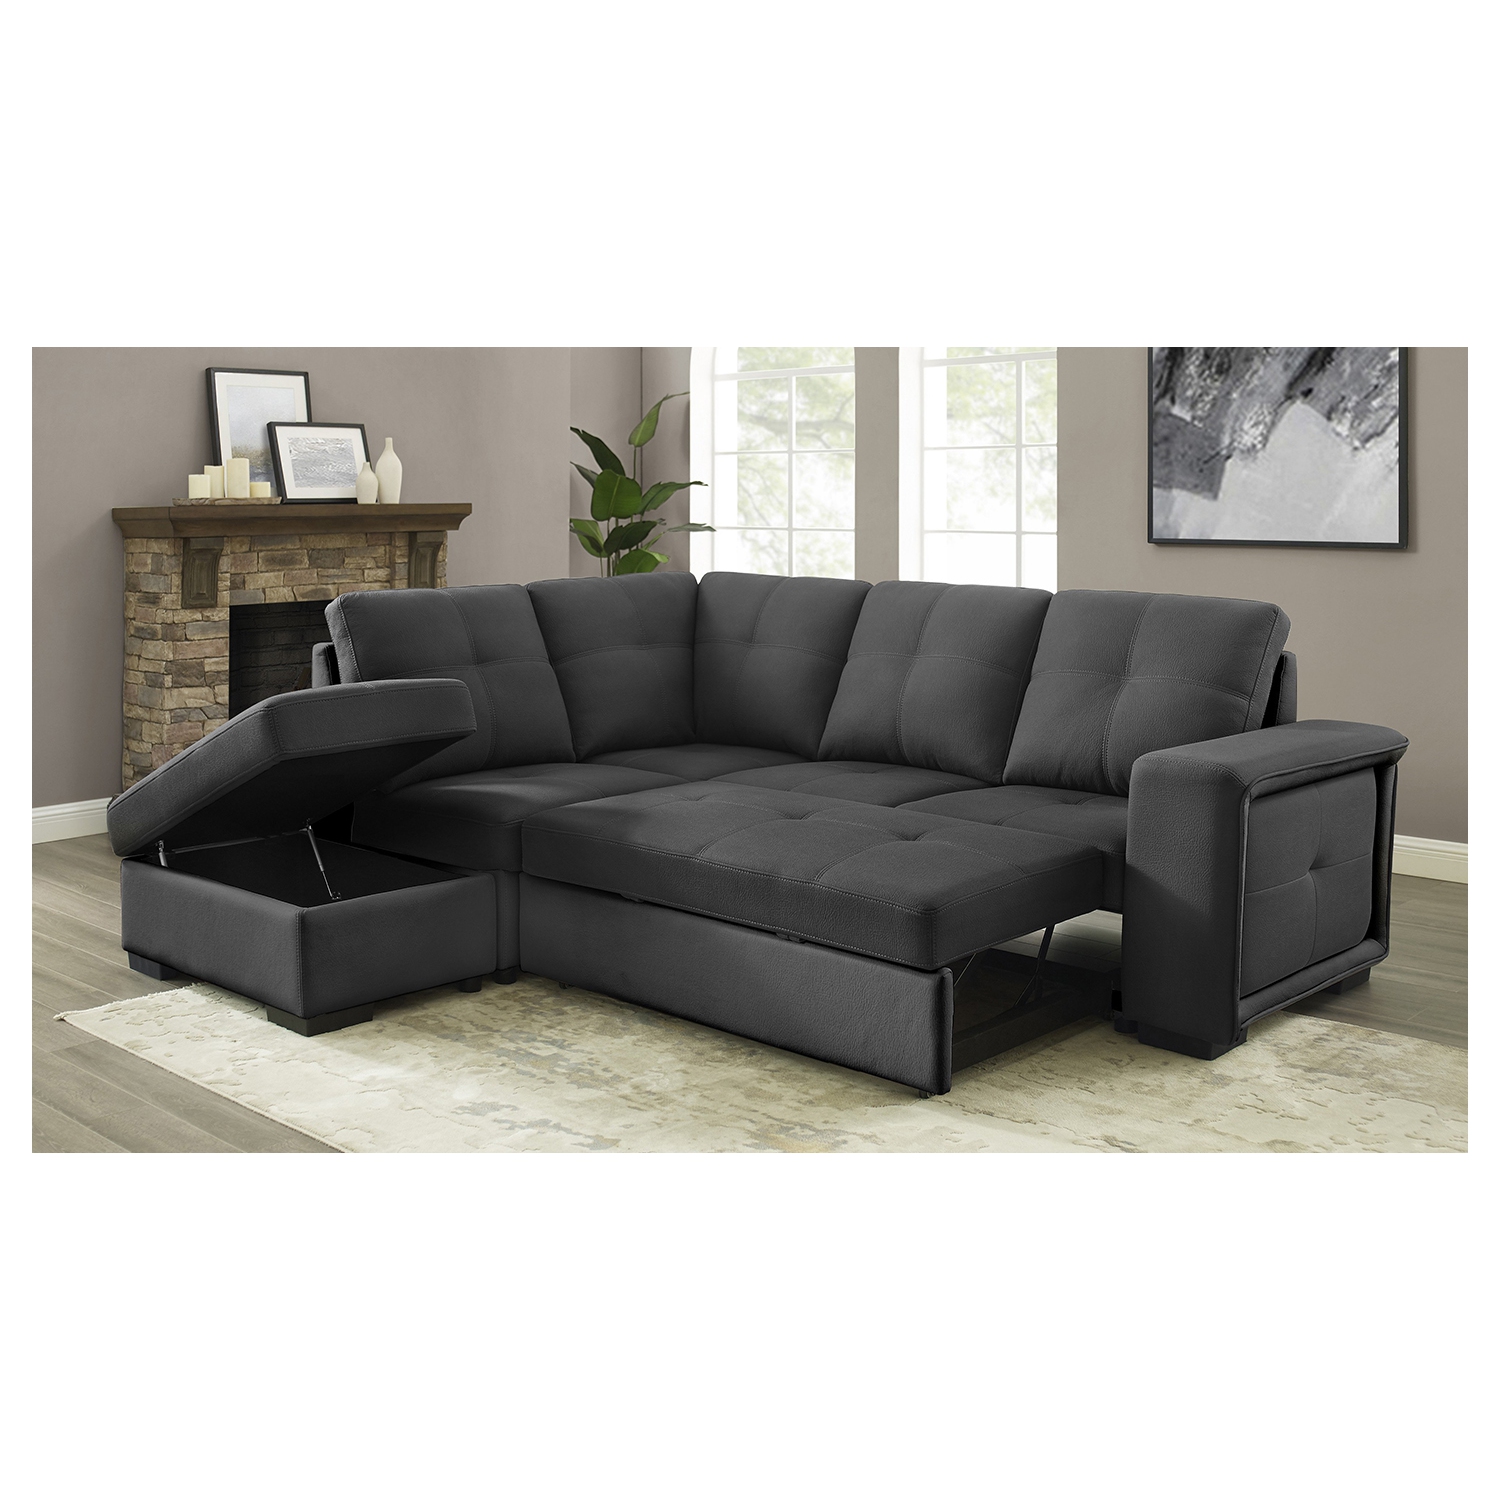 94-inch Soho Sofa Bed (LHF) with Pull-Out Sleeper, Corner Sofa Bed with Ottoman with Storage, Pull-Out Sleeper Sofa 2 in 1 Sofa Bed * FREE OTTOMAN *